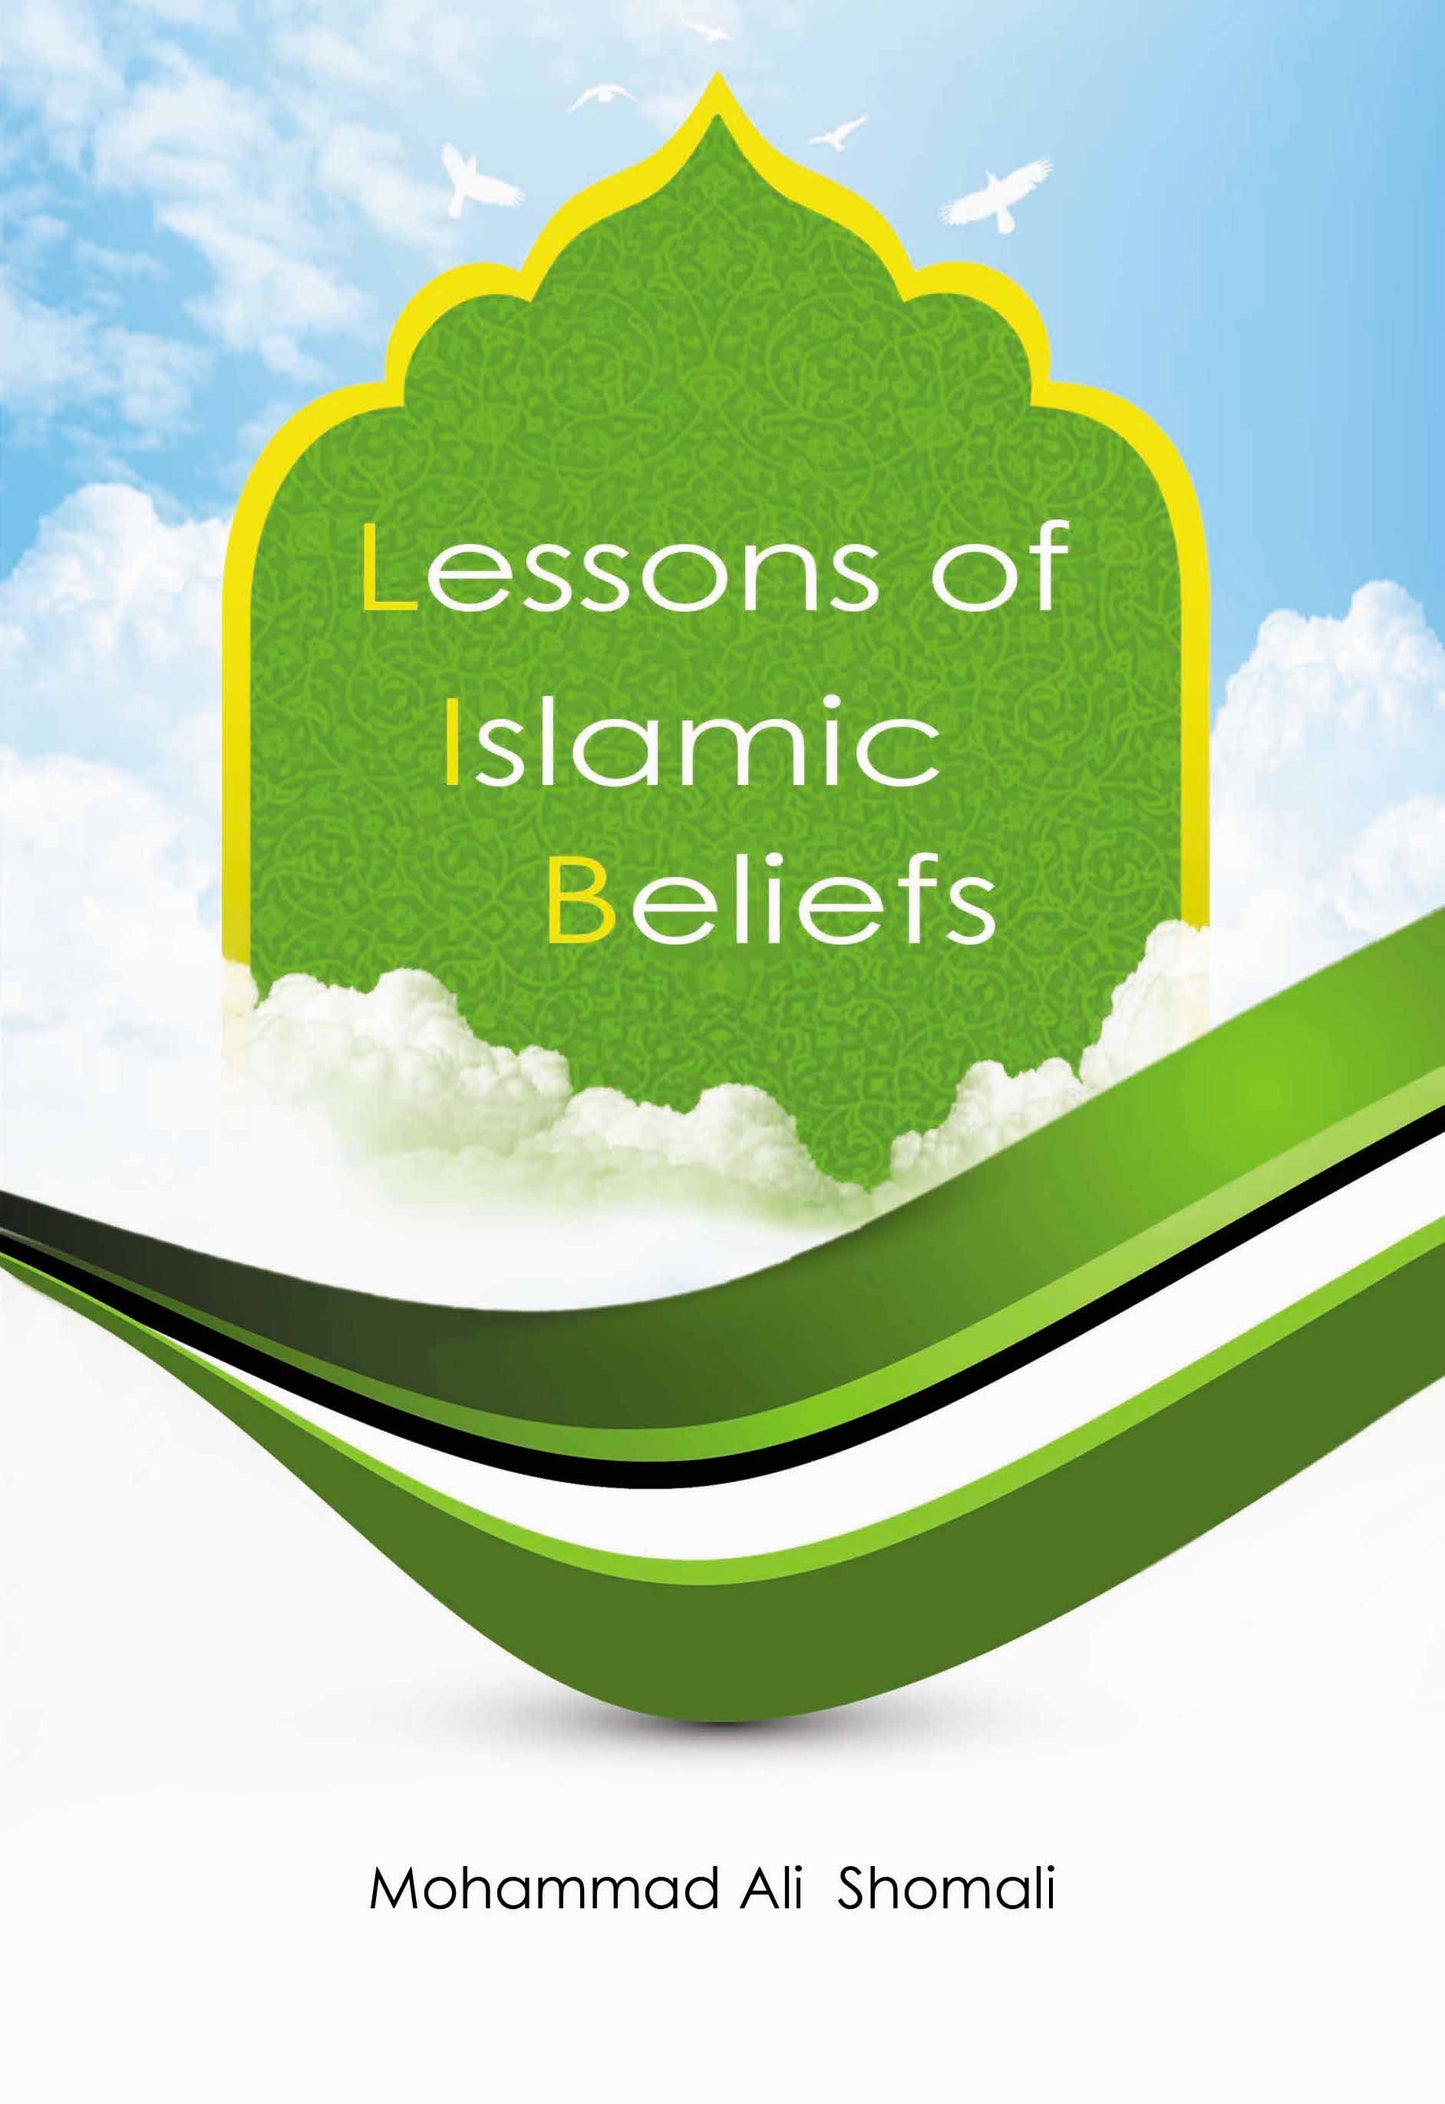 Lessons on Islamic Beliefs